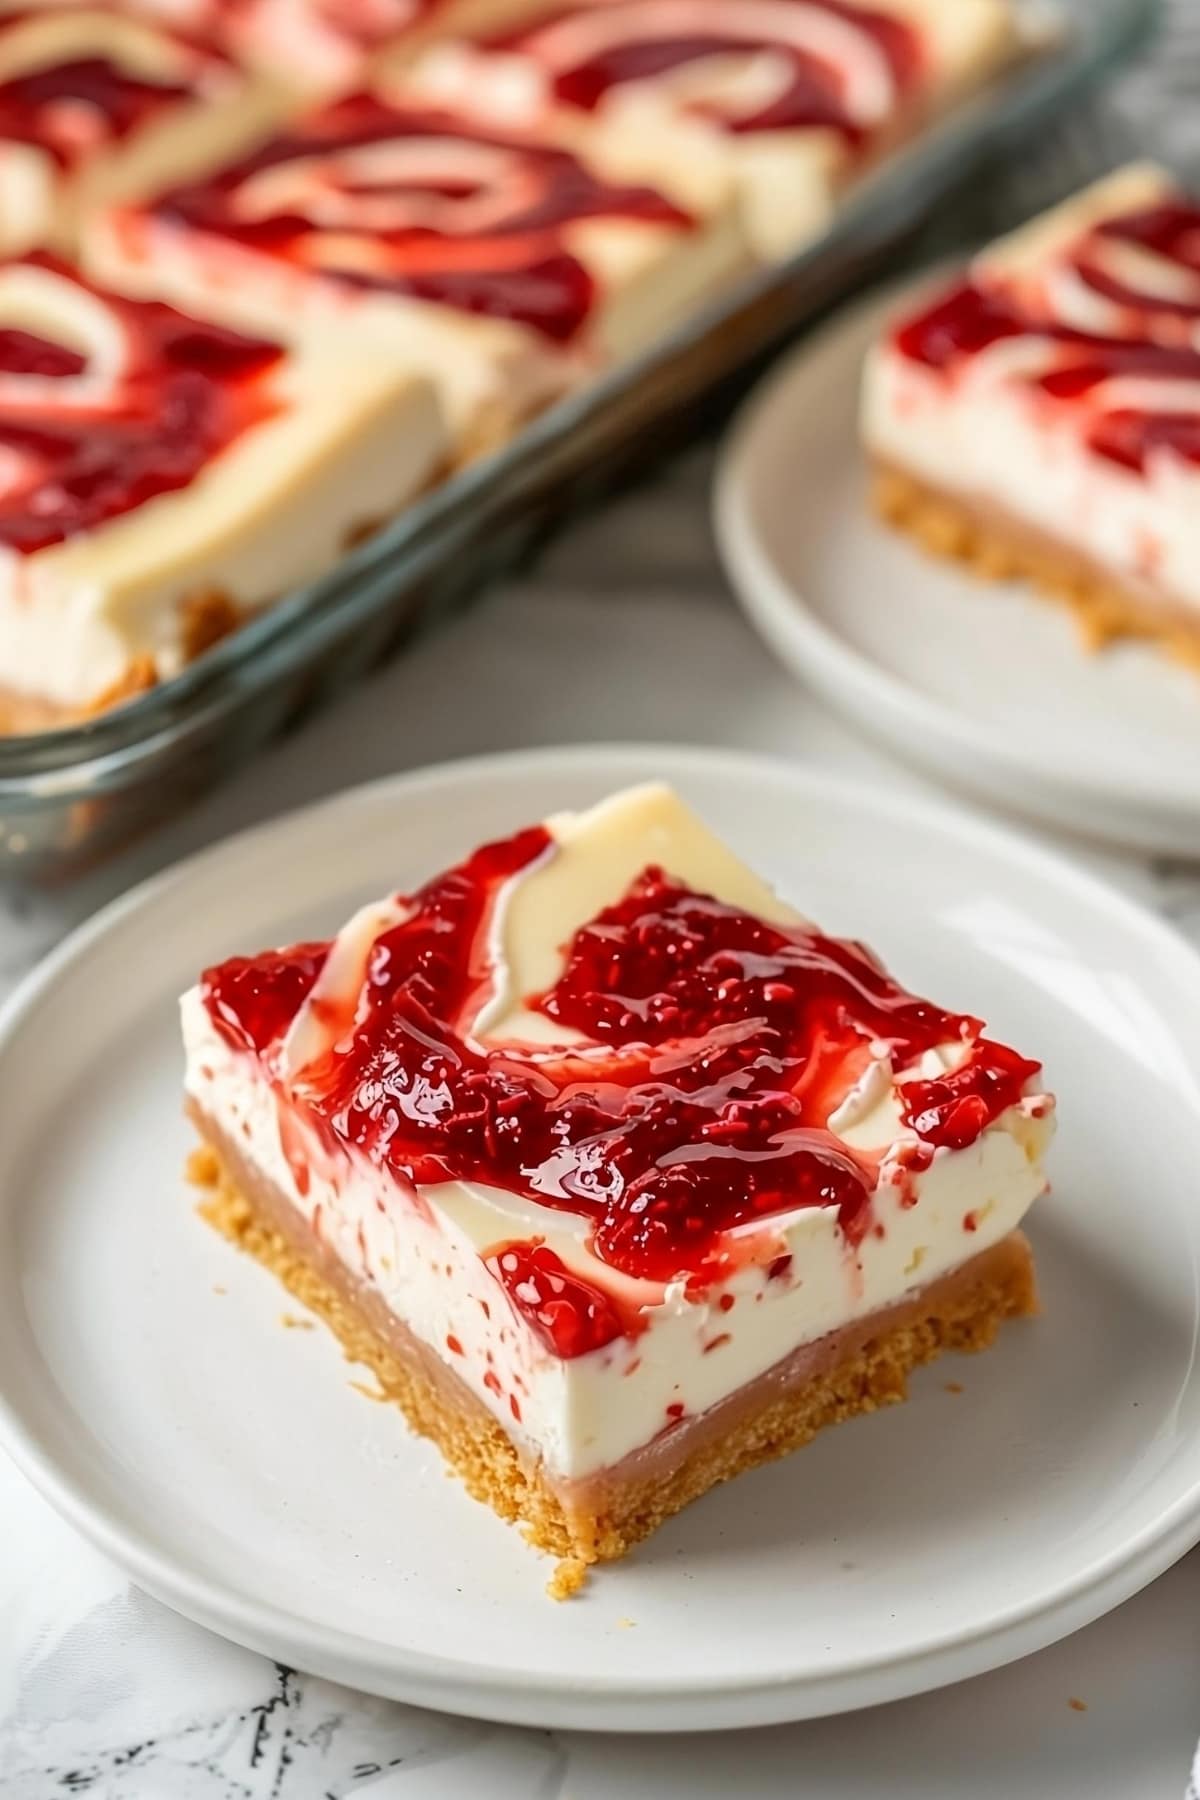 Sliced strawberry cheesecake bar on a plate.